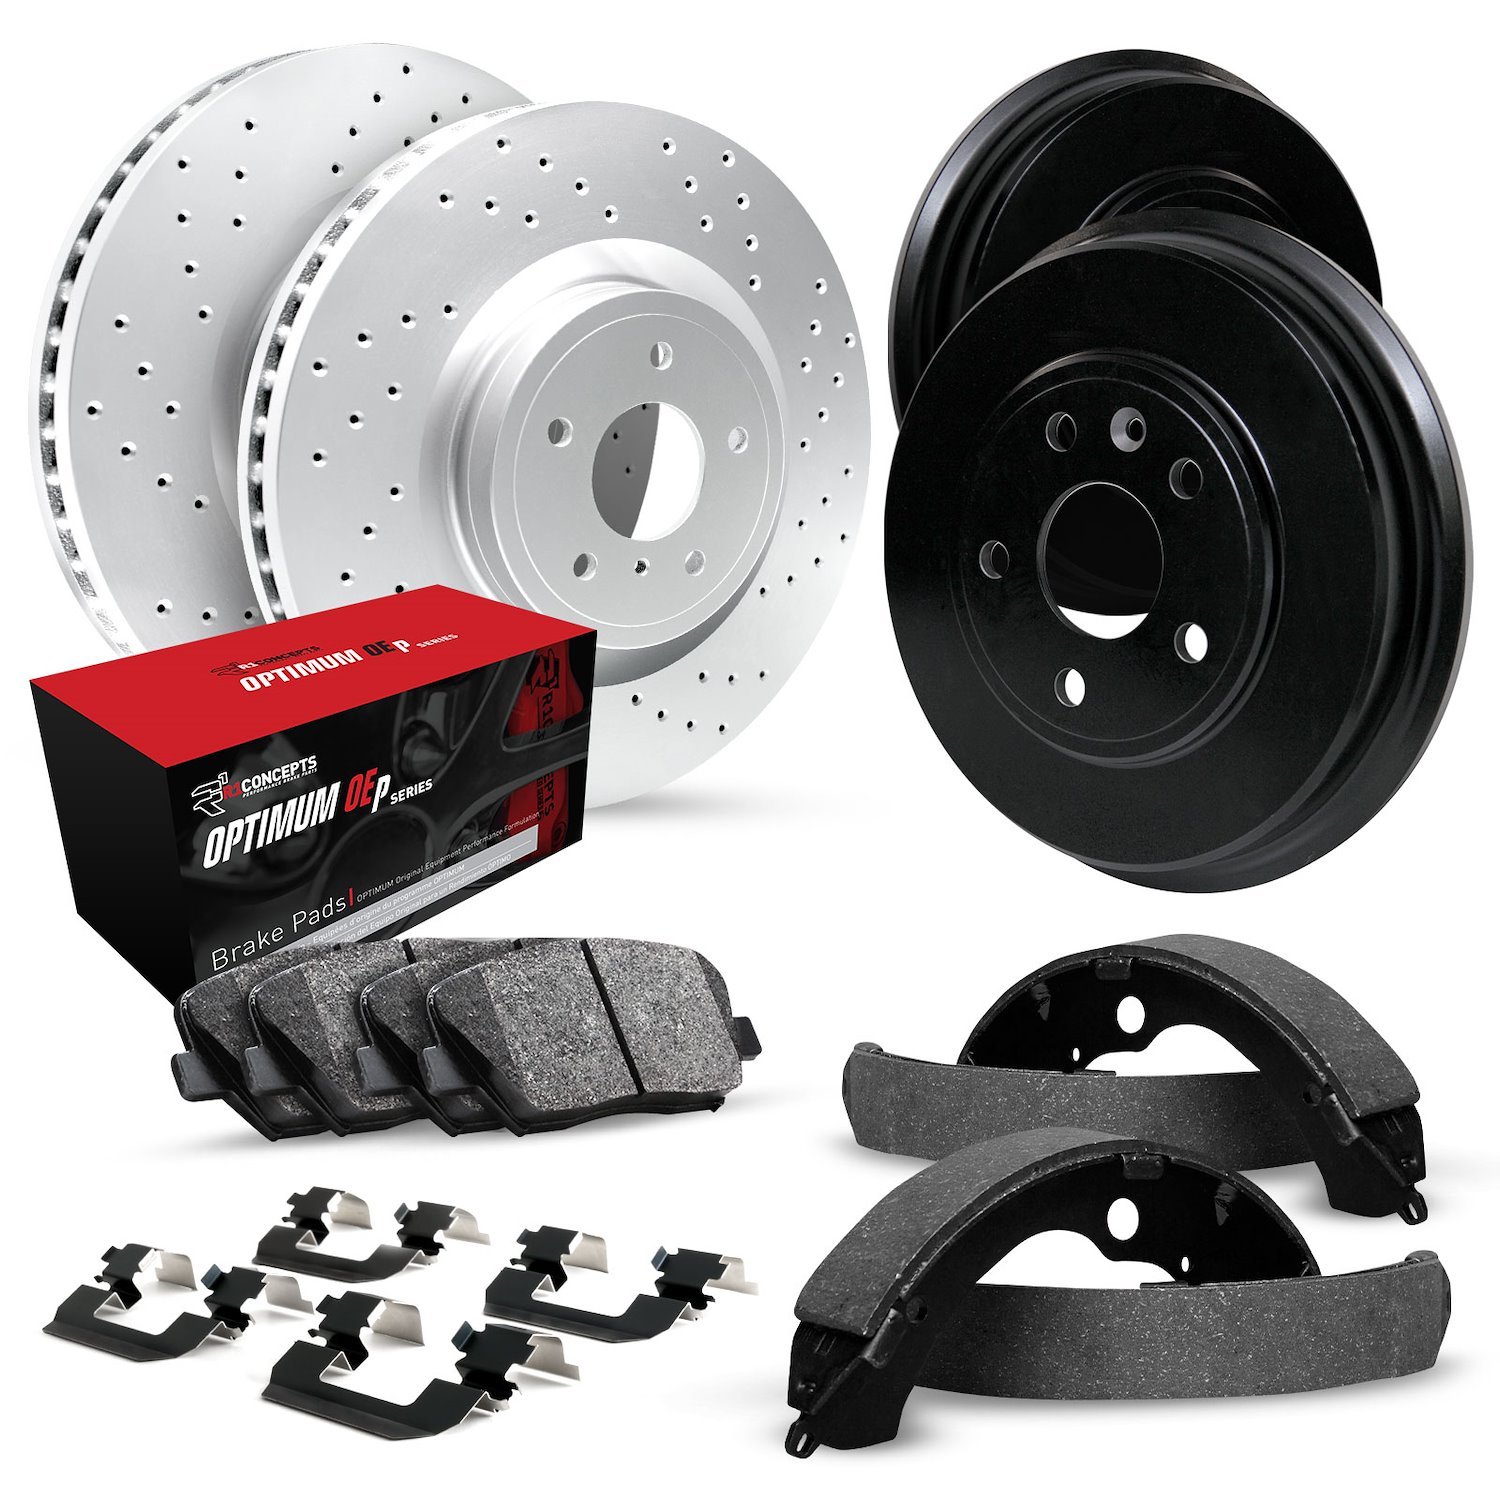 GEO-Carbon Drilled Brake Rotor & Drum Set w/Optimum OE Pads, Shoes, & Hardware, 1995-2000 GM, Position: Front & Rear